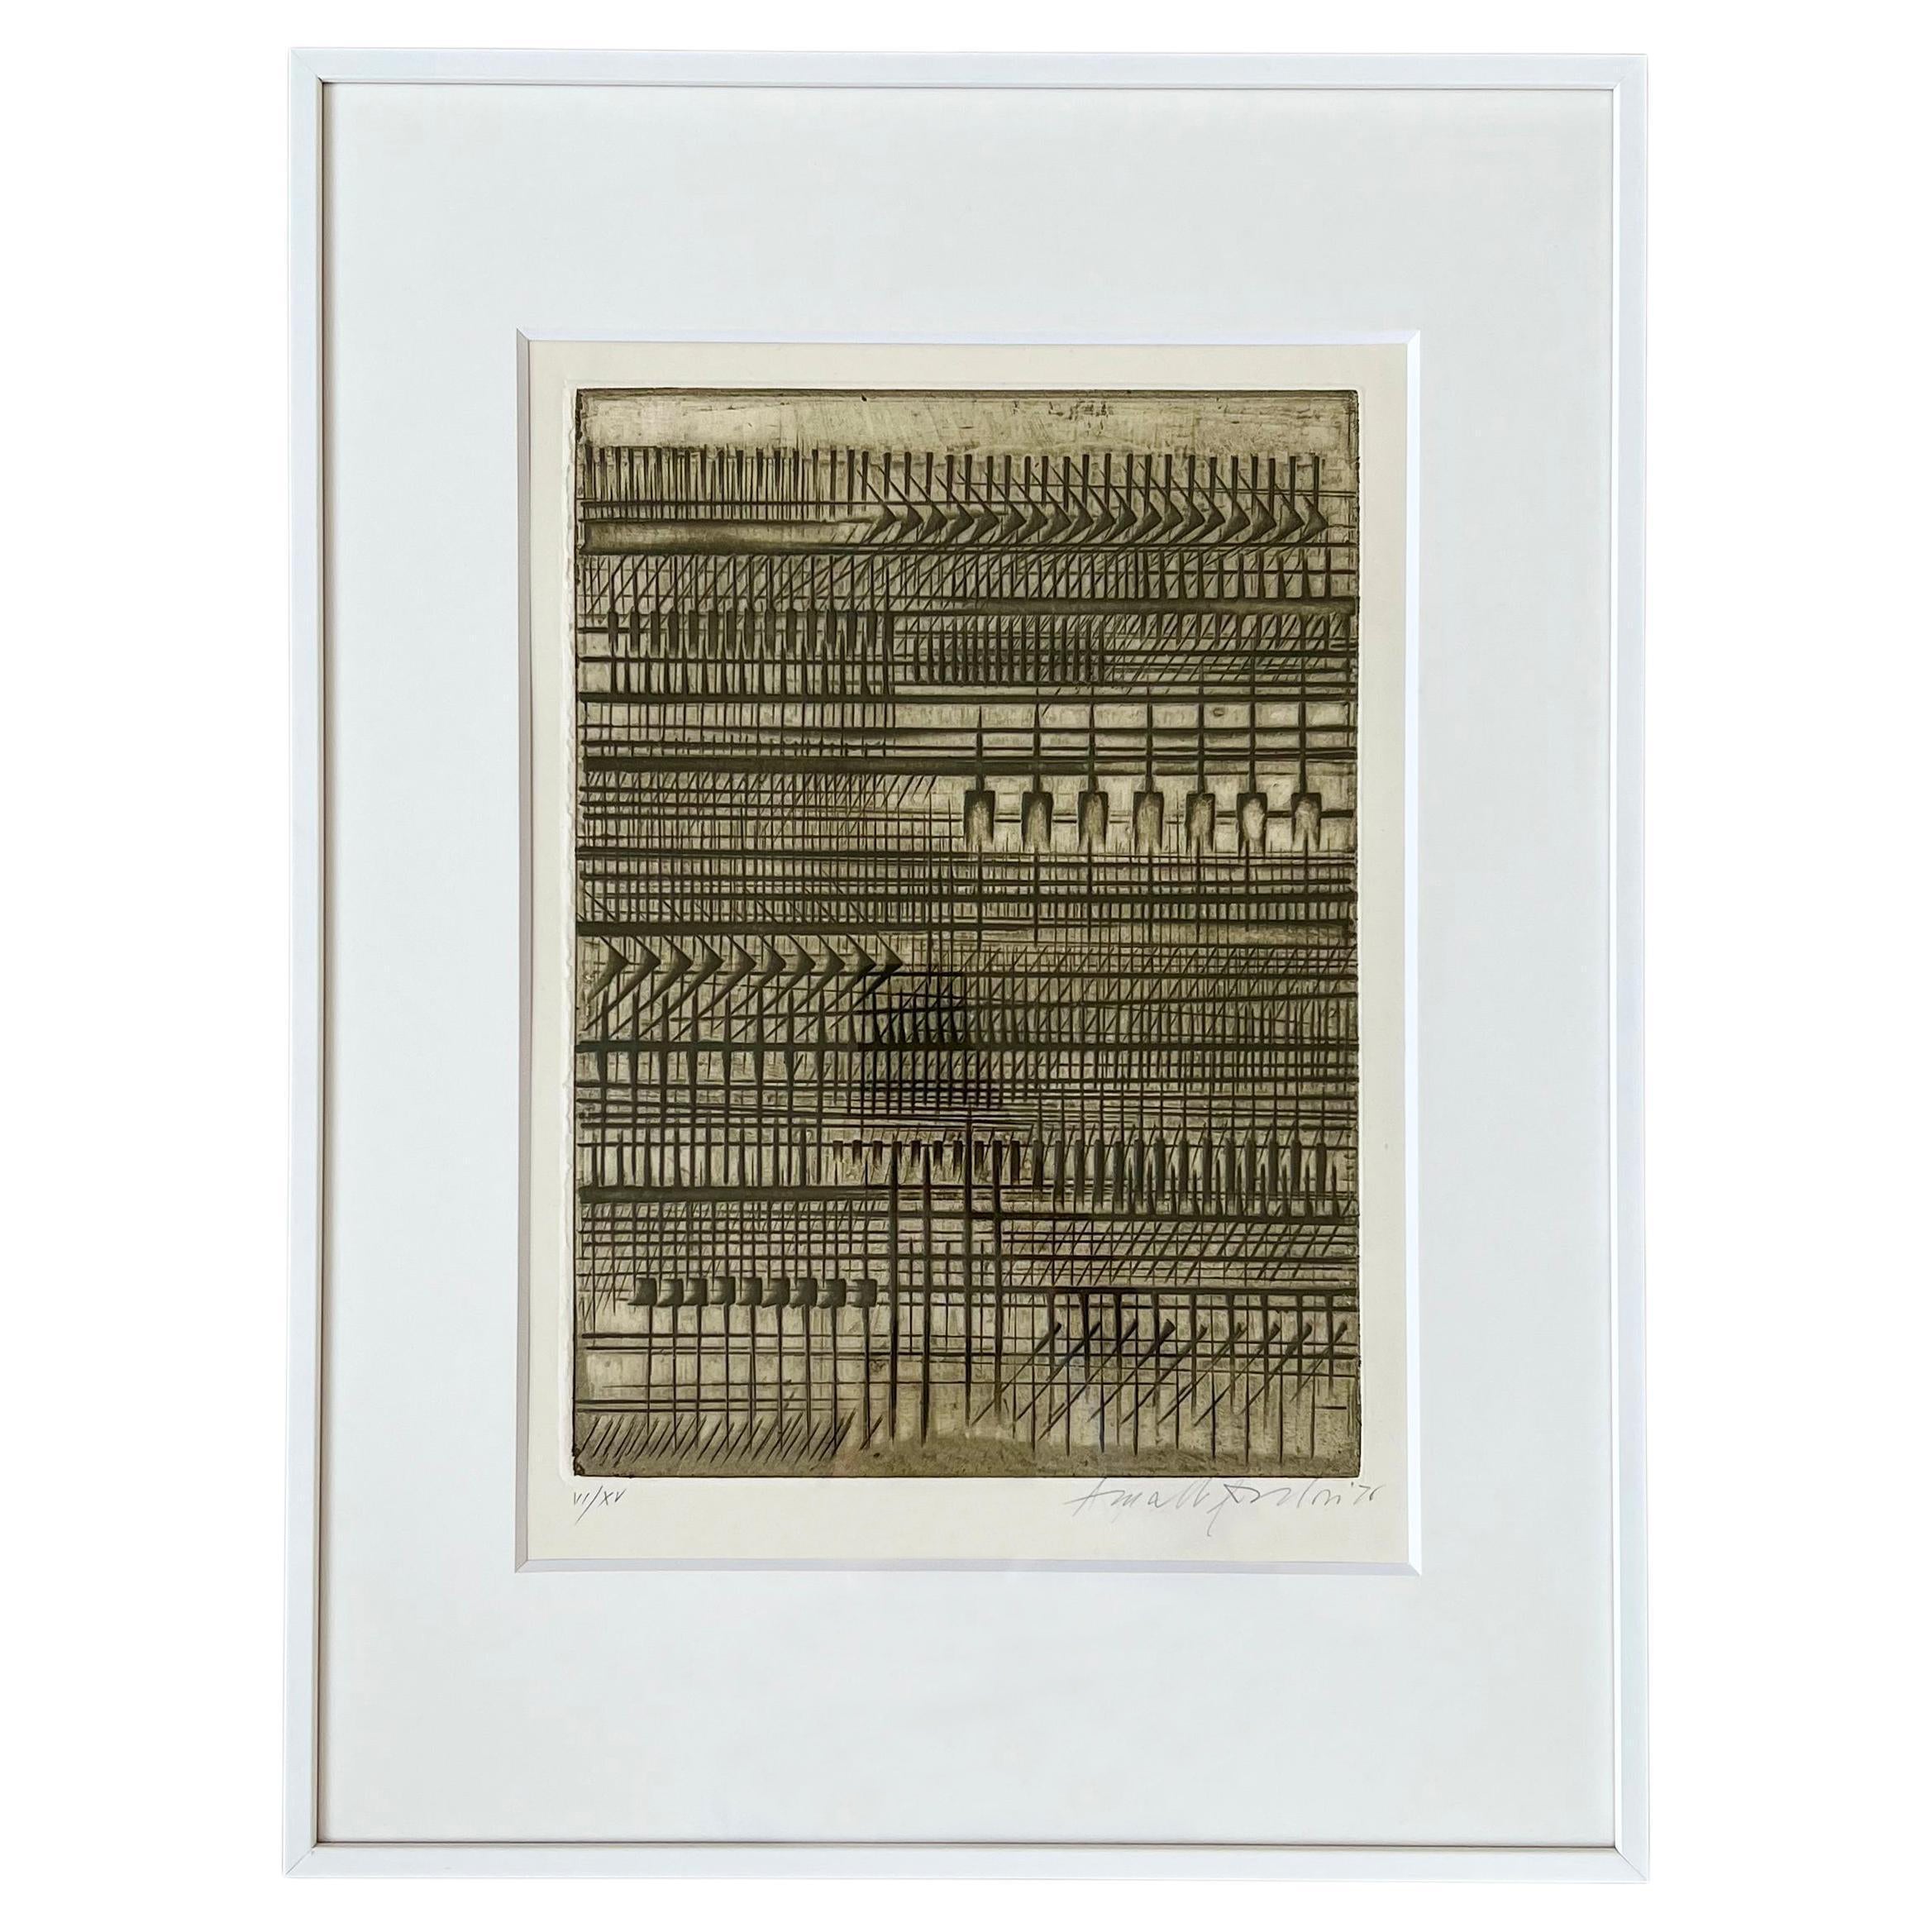 Original Engraving by Arnaldo Pomodoro, signed and numbered, edition of fifteen